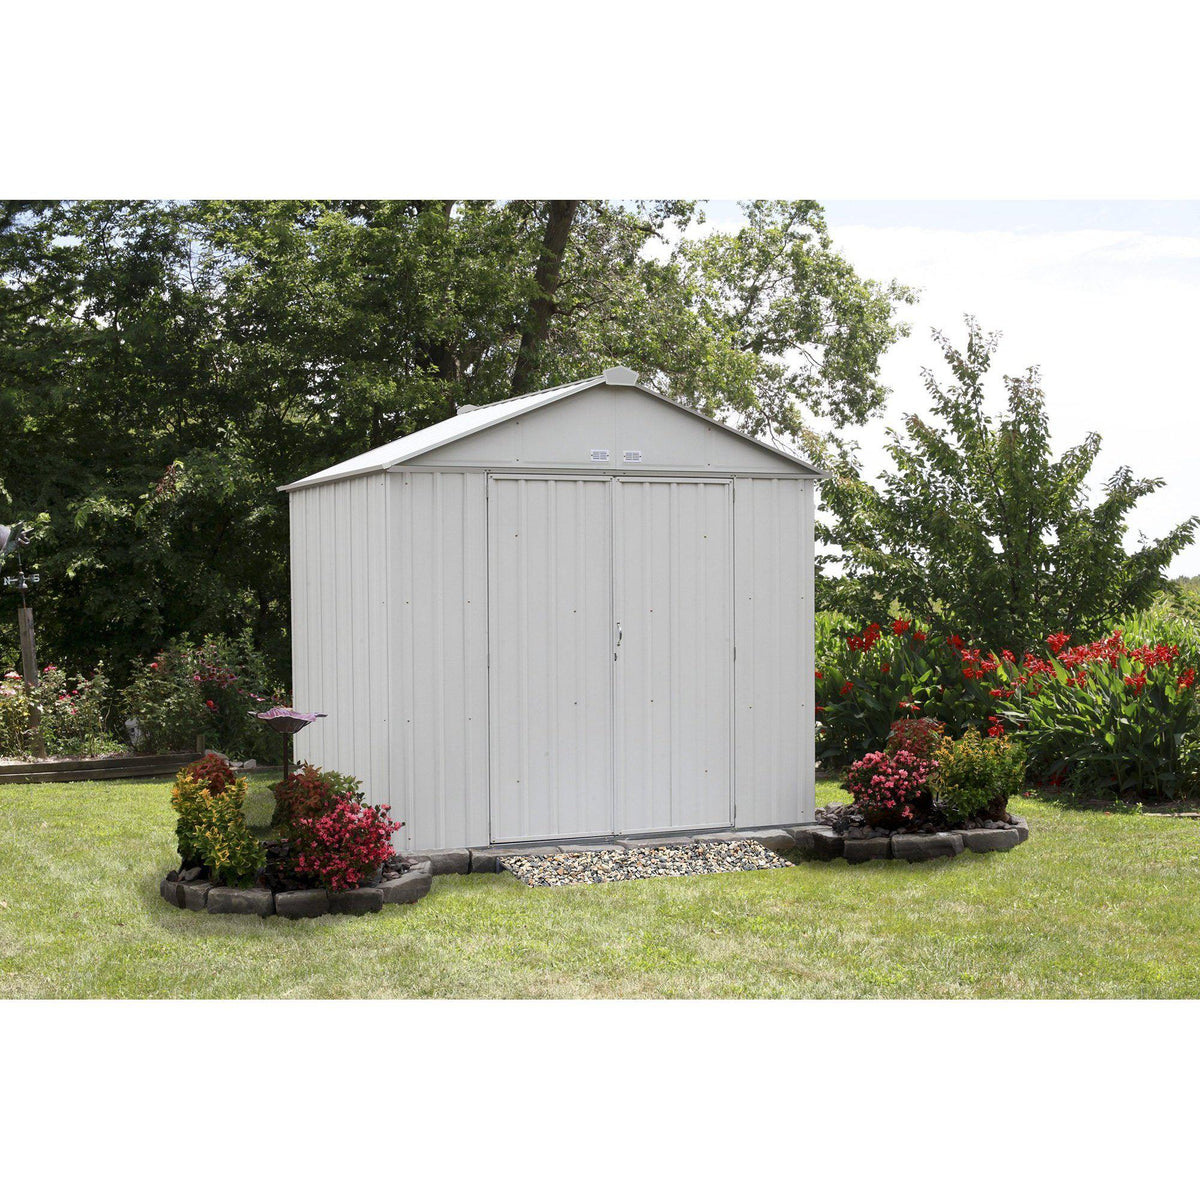 Arrow EZEE Shed High Gable Steel Storage Shed, Cream, 8 x 7 ft.